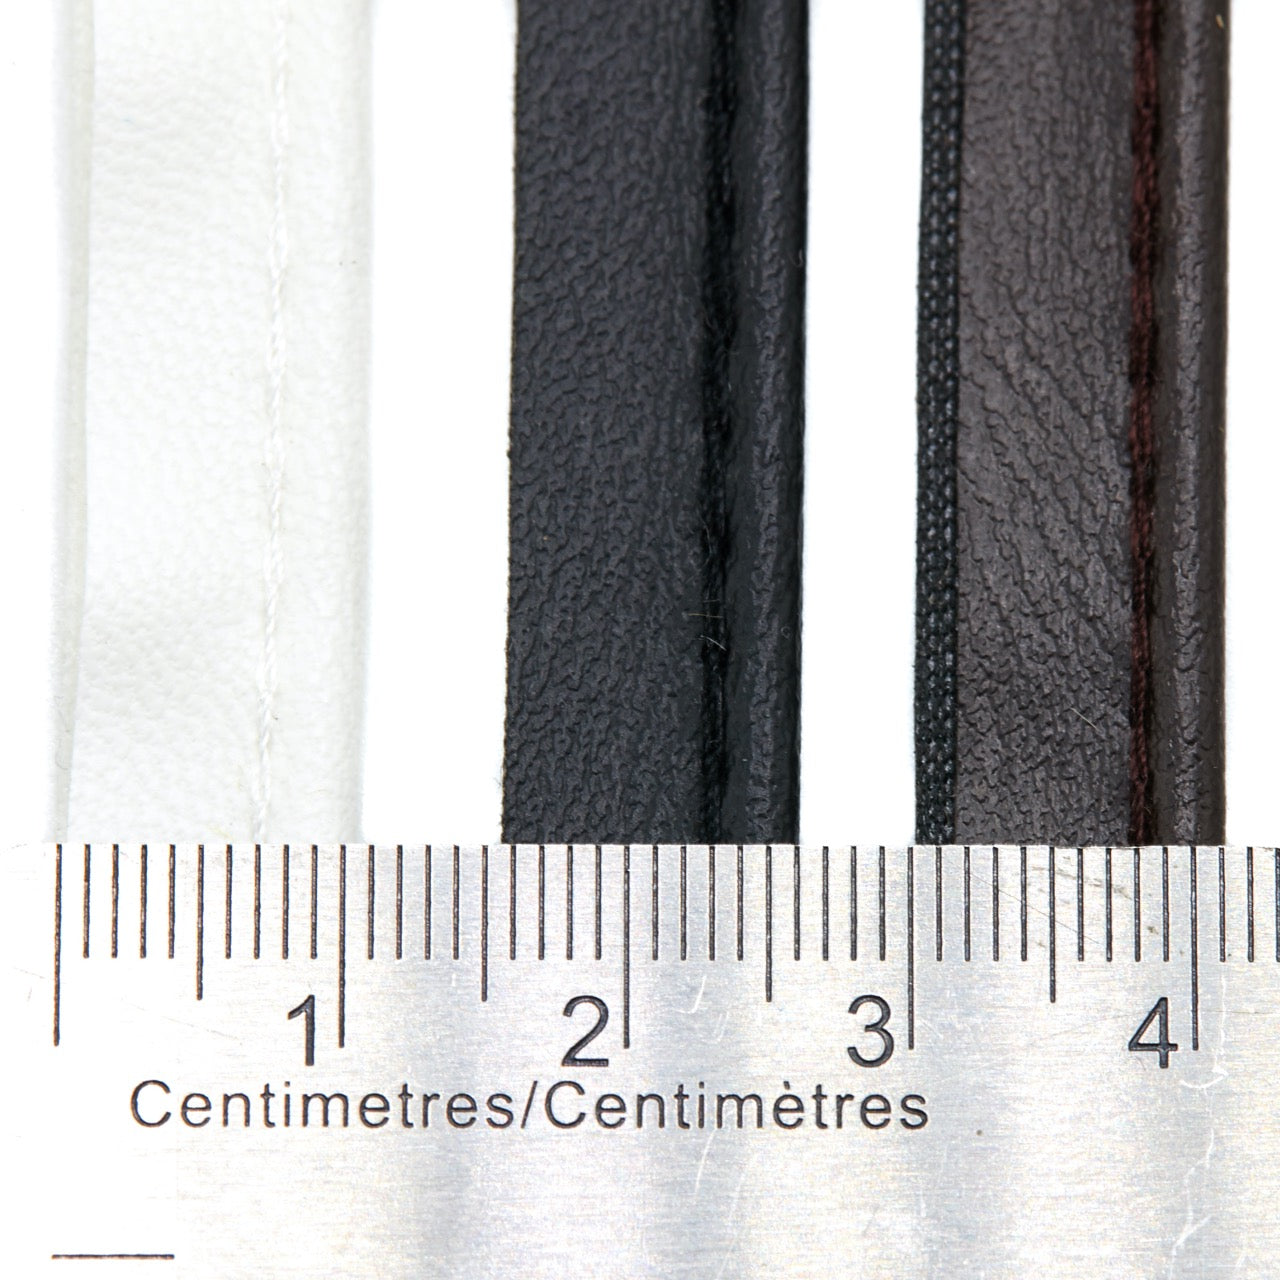 Faux Leather (PU) Piping - sizing